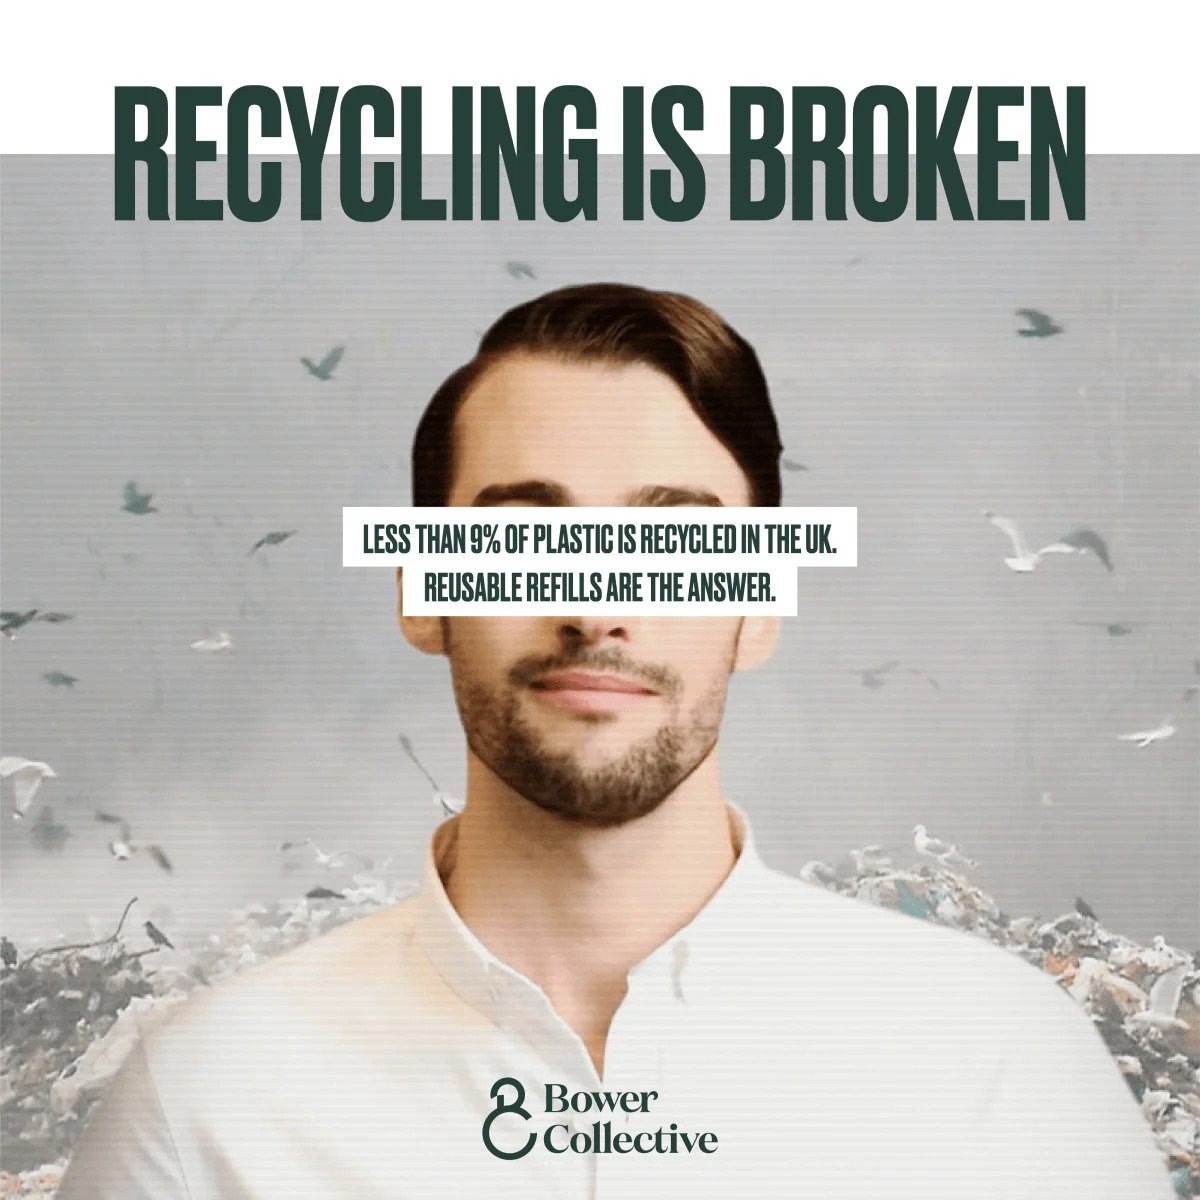 Using a fake spokesperson to highlight the fake nature of plastic recycling - mega results for Bower Collective